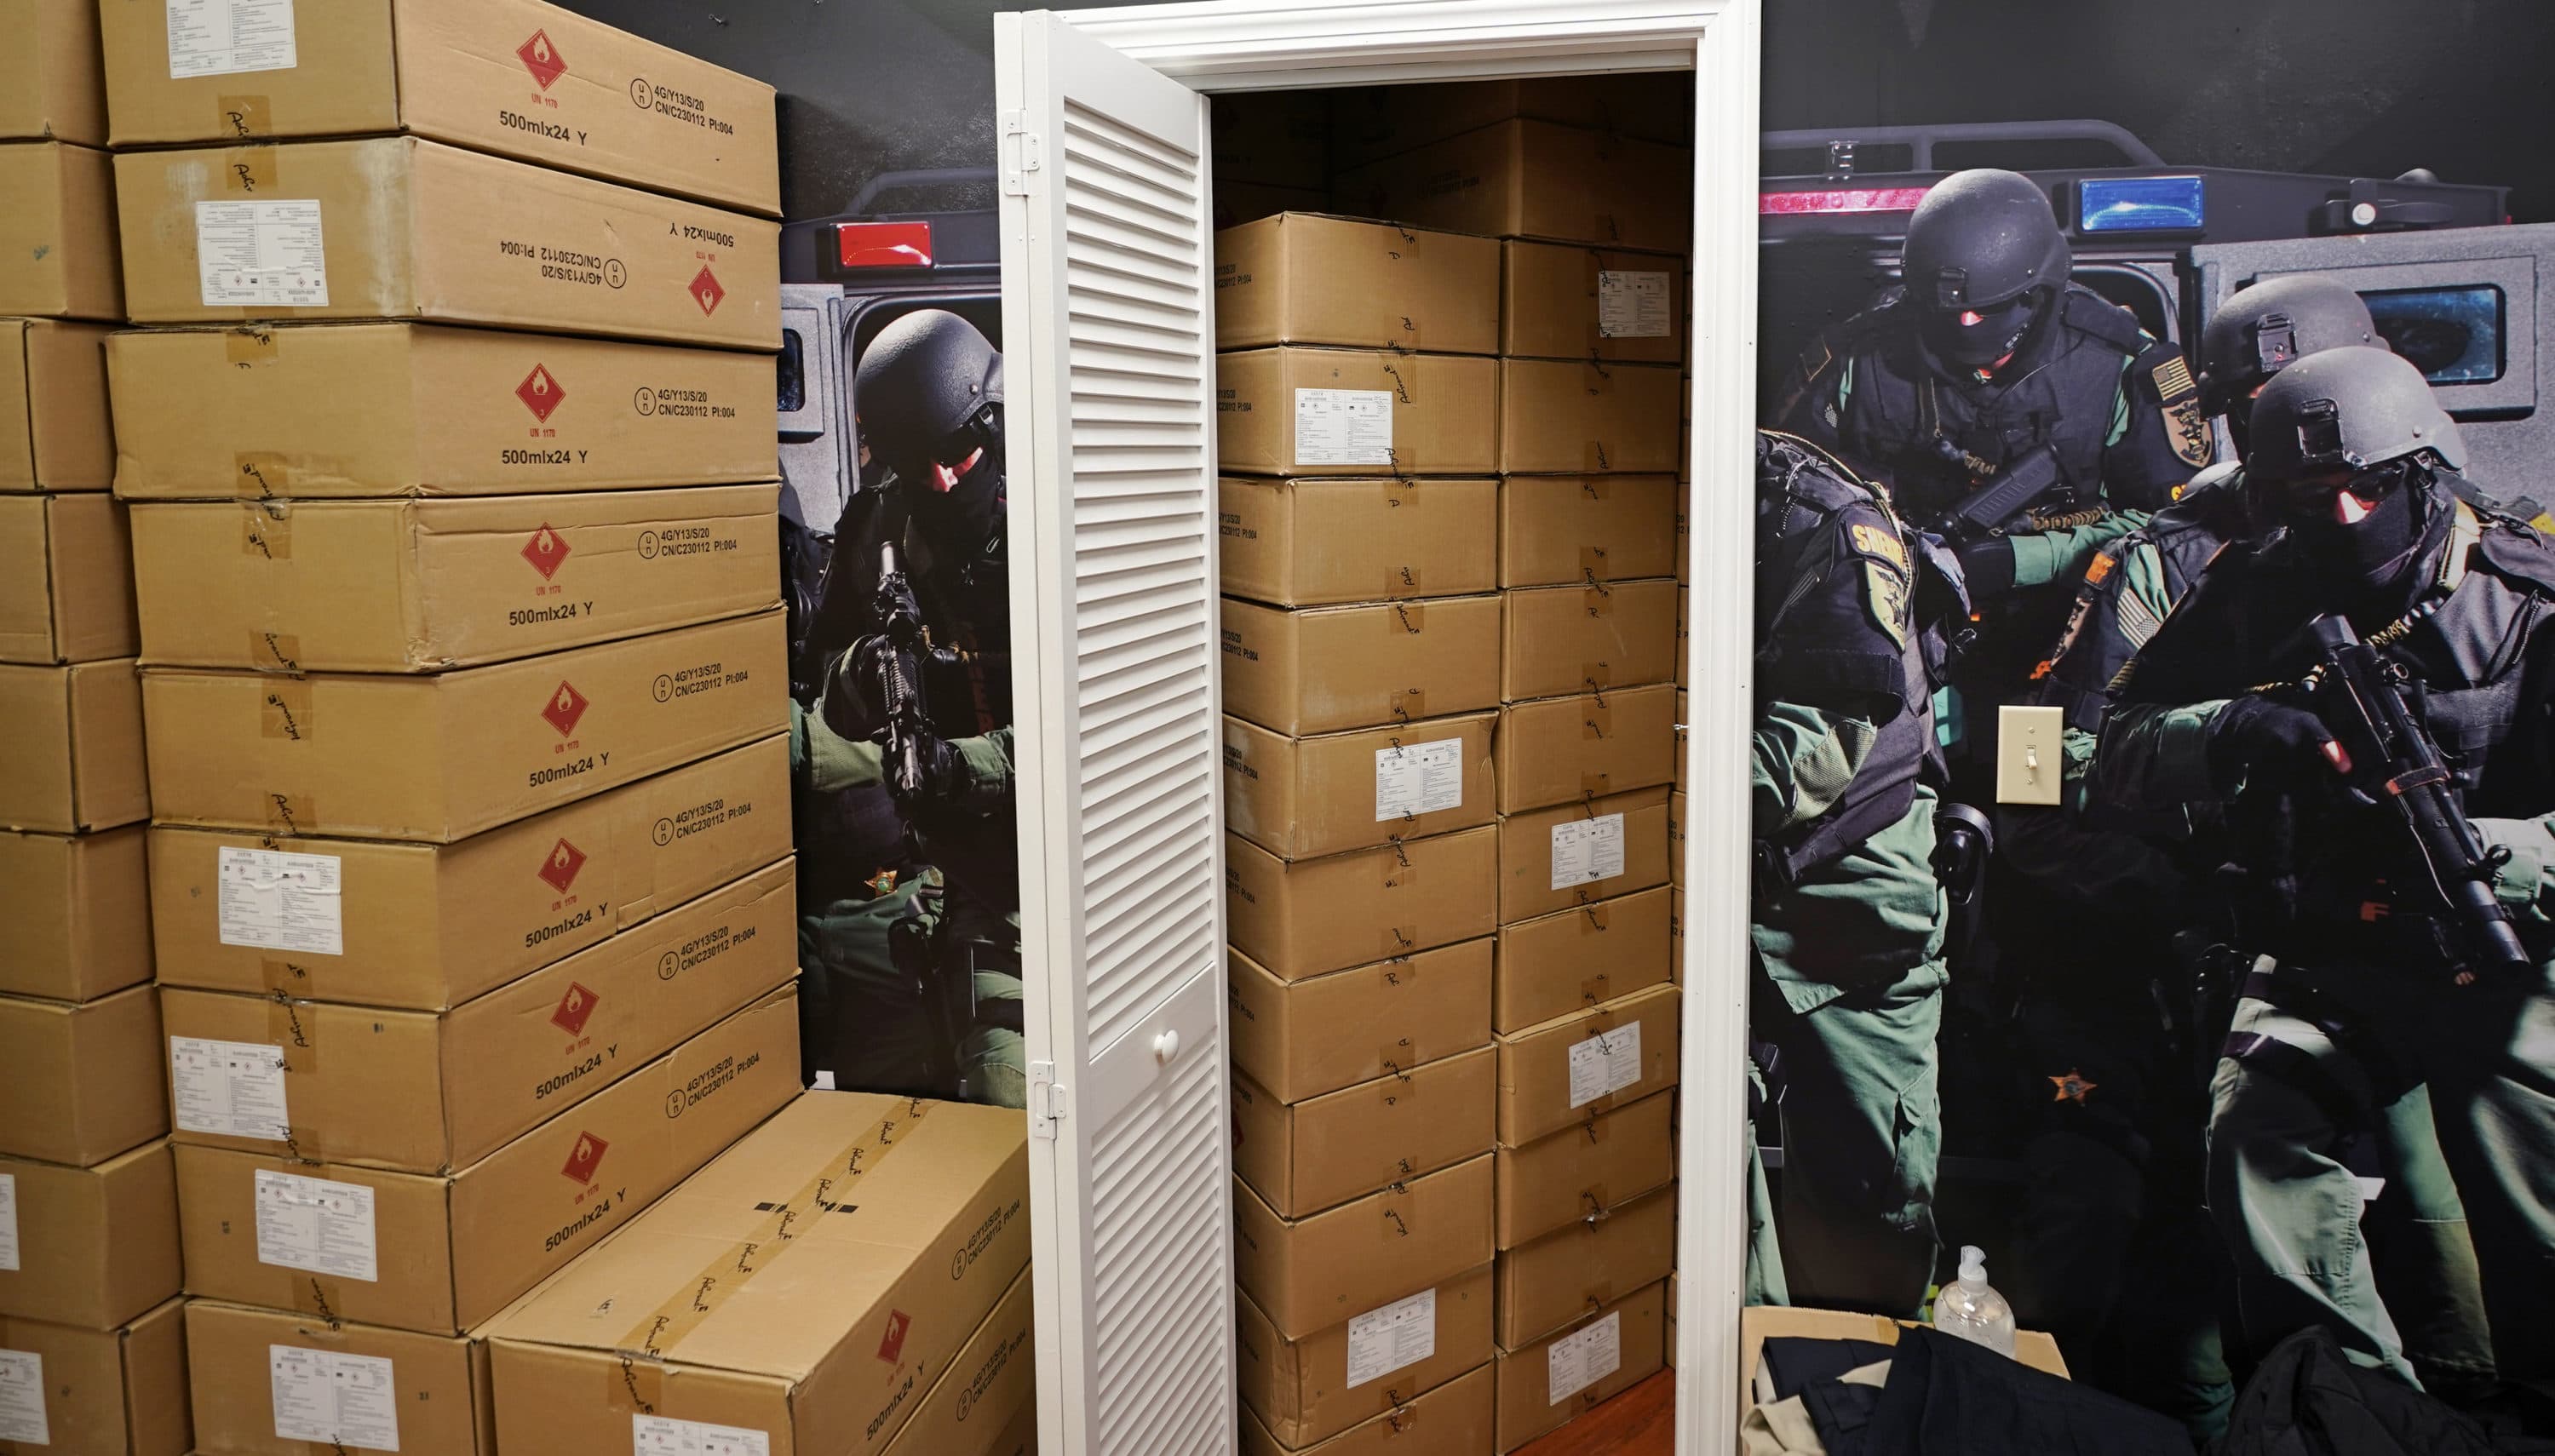 Cases of hand sanitizer are stacked on the retail floor and stored in a changing room for fitting bulletproof vests at the Body Armor Outlet store, Wednesday, Dec. 9, 2020, in Salem, N.H. (Charles Krupa/AP)